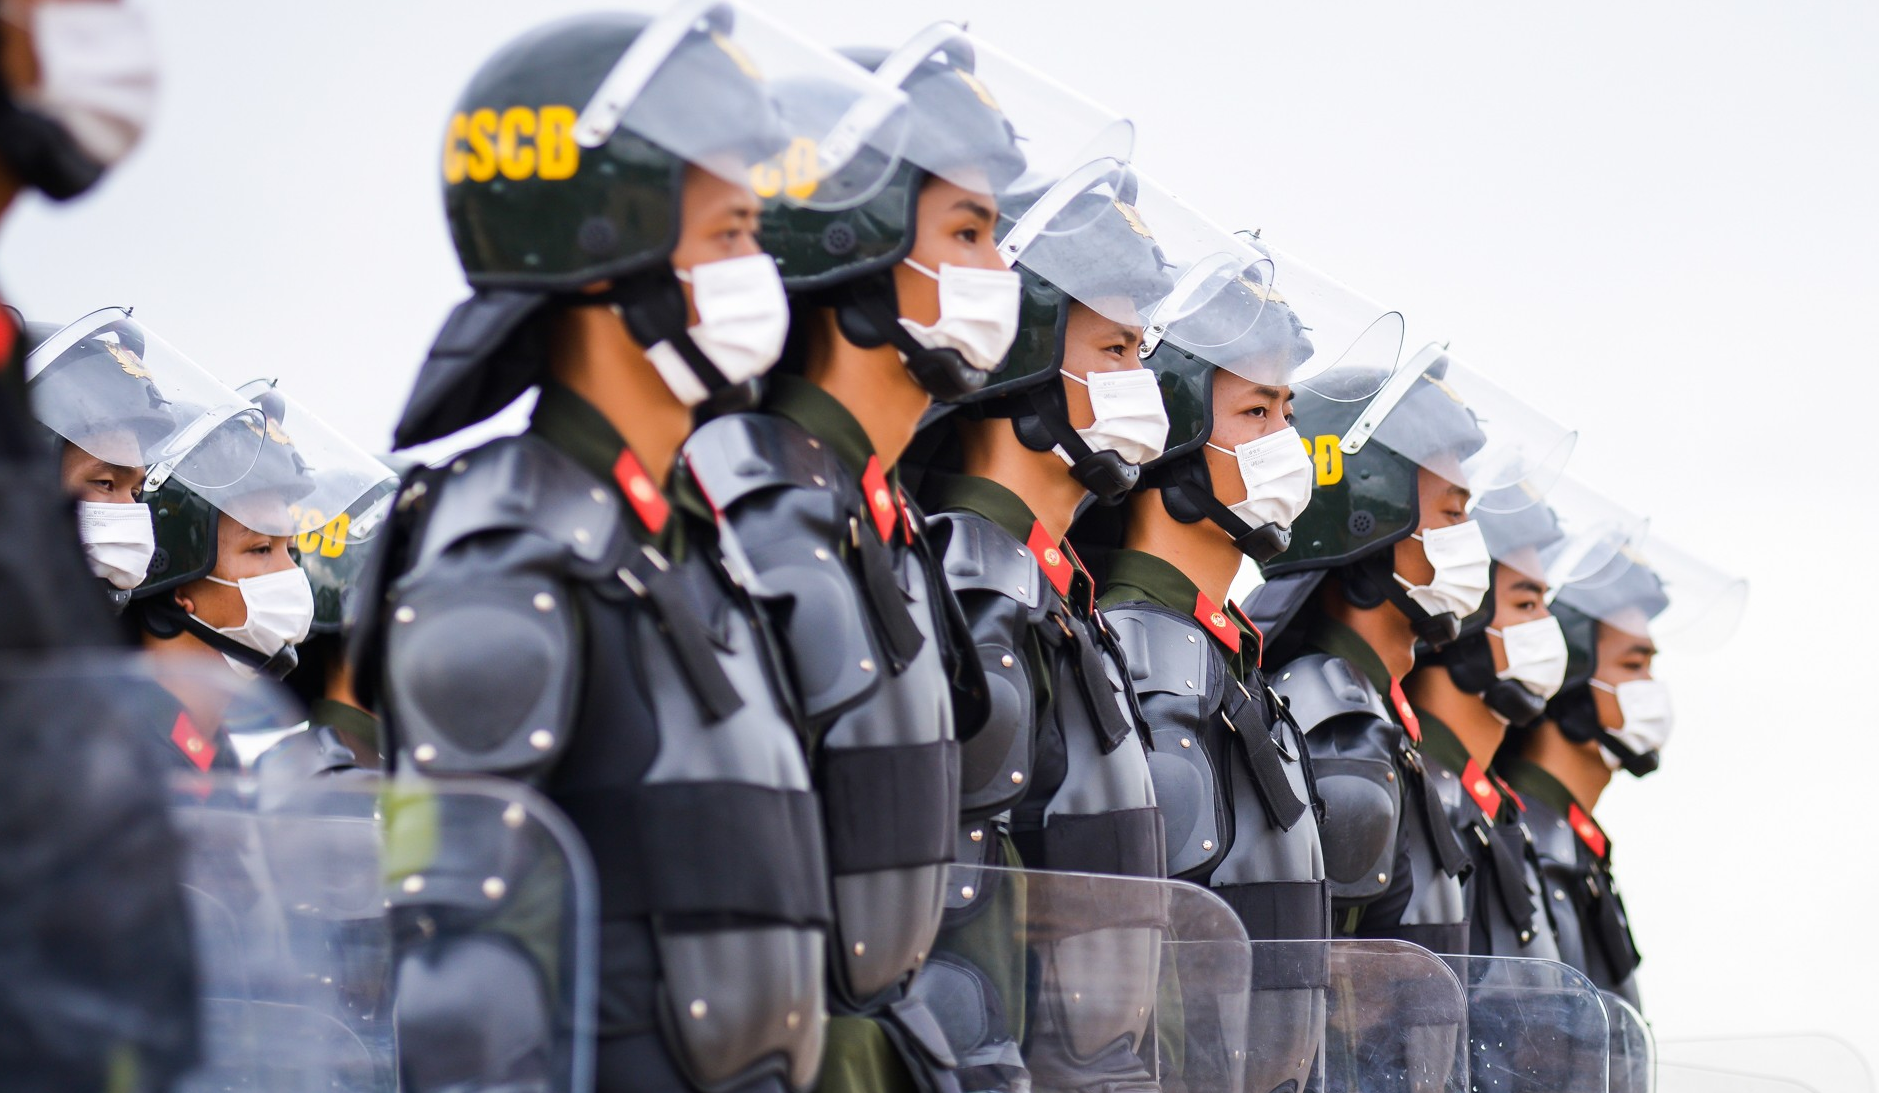 Tasks and powers of Mobile Police Forces in Vietnam